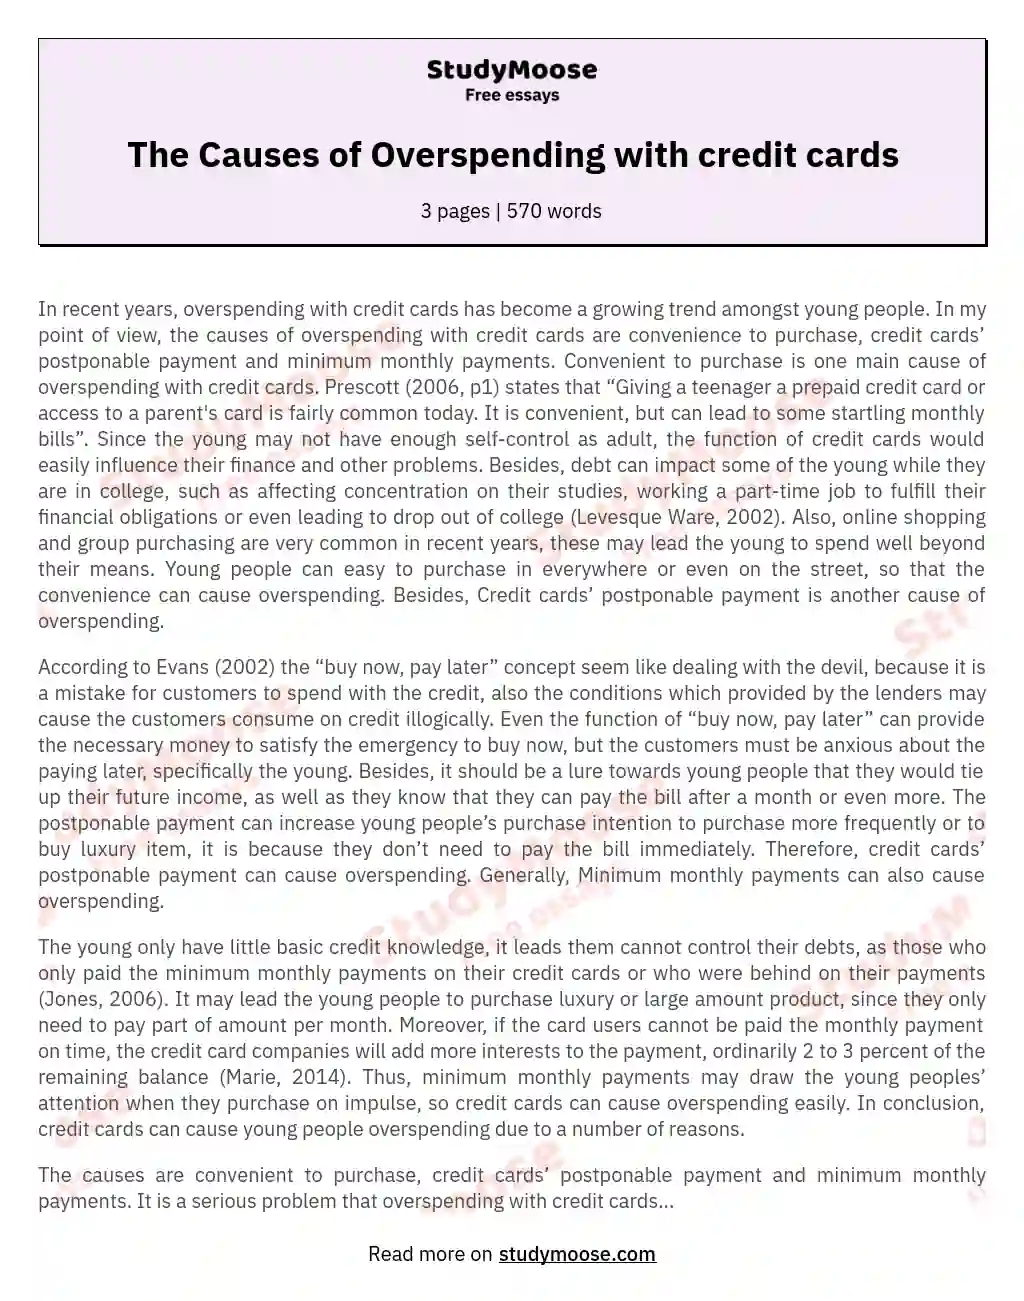 The Causes of Overspending with credit cards essay